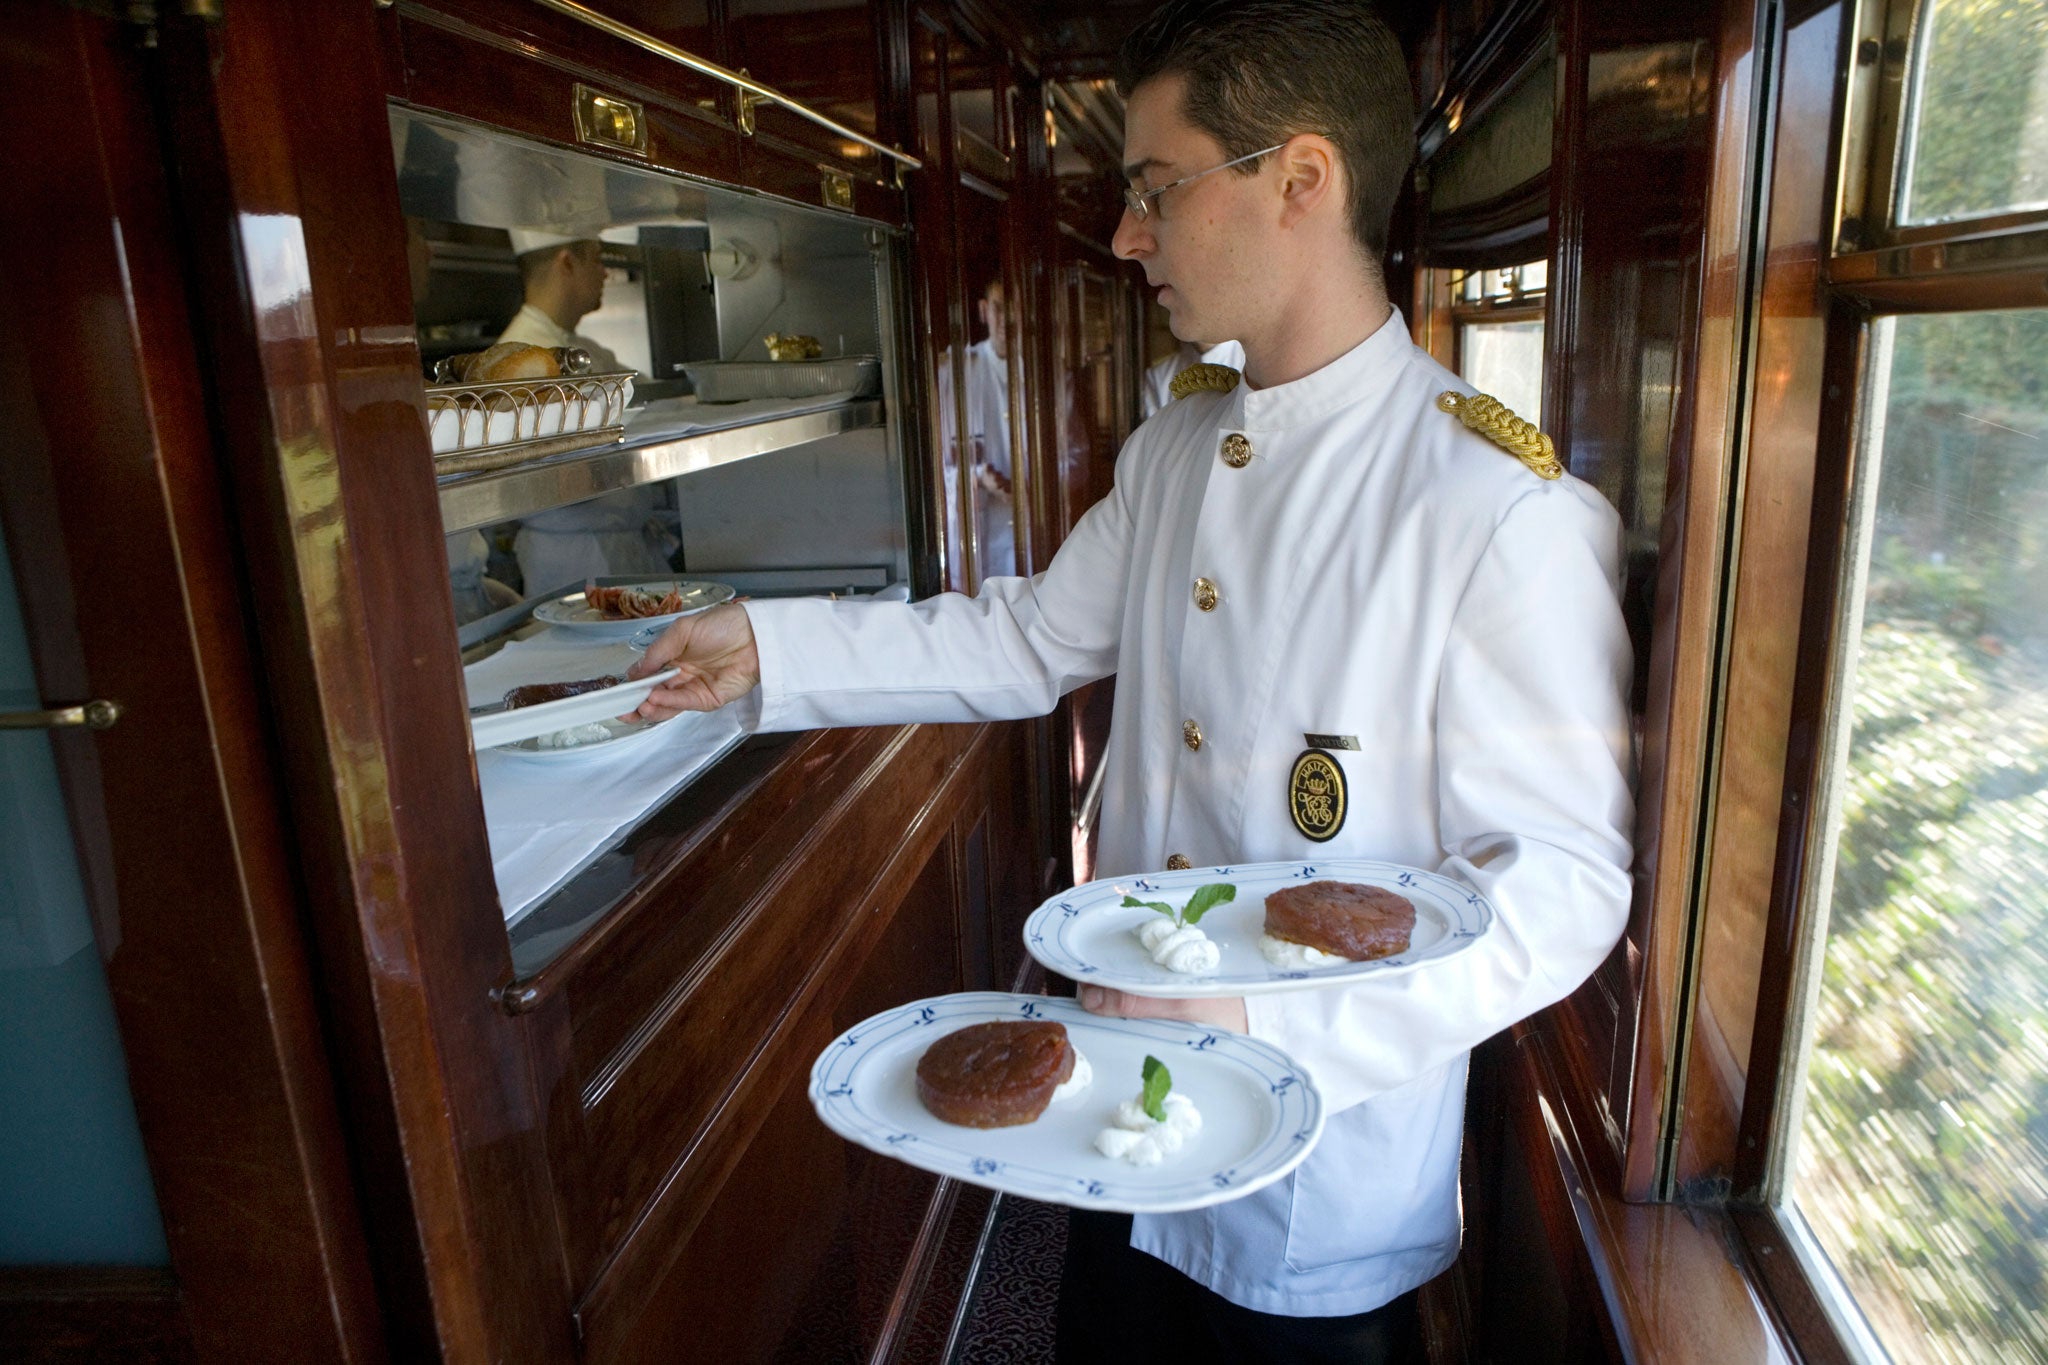 Memorable treat: The food and dining car on the Venice-Simplon Orient Express